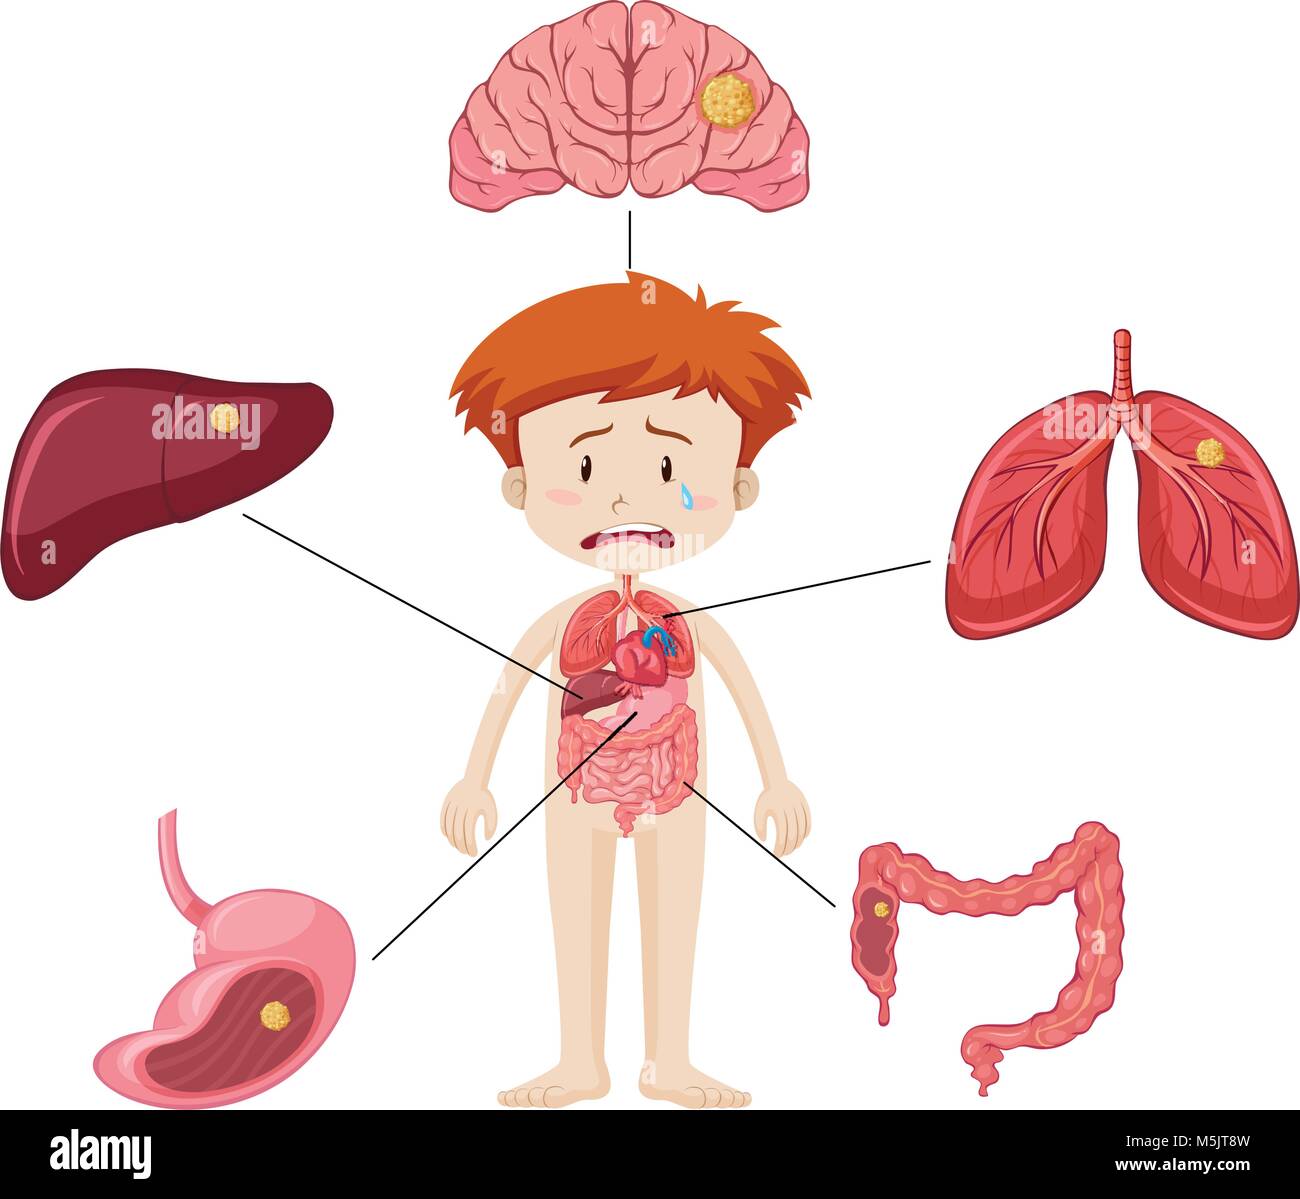 Boy and diagram showing different parts of organs with disease illustration Stock Vector